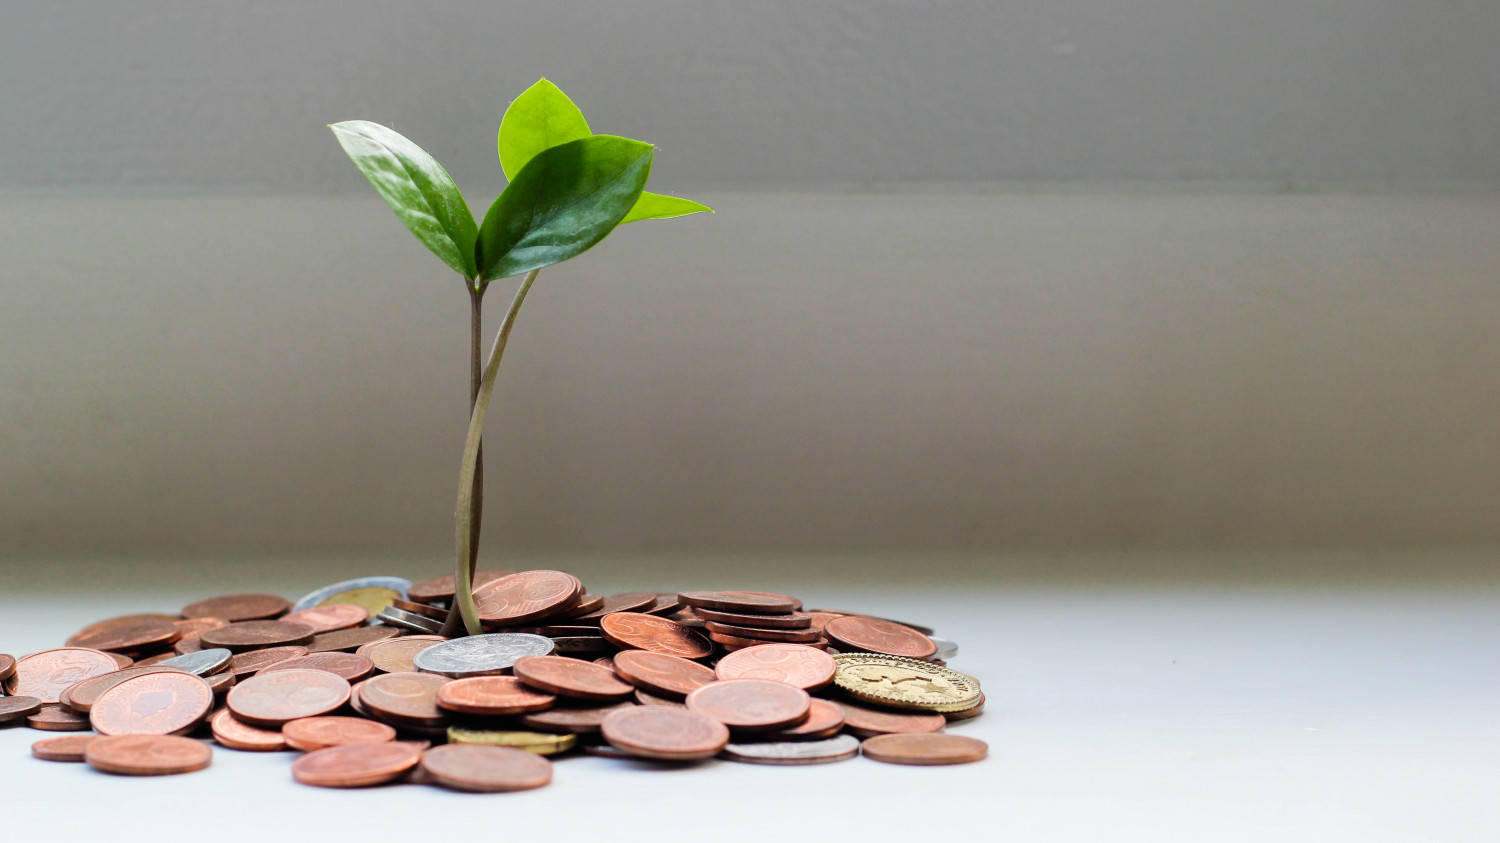 Image of a plant growing out of a pile of coins